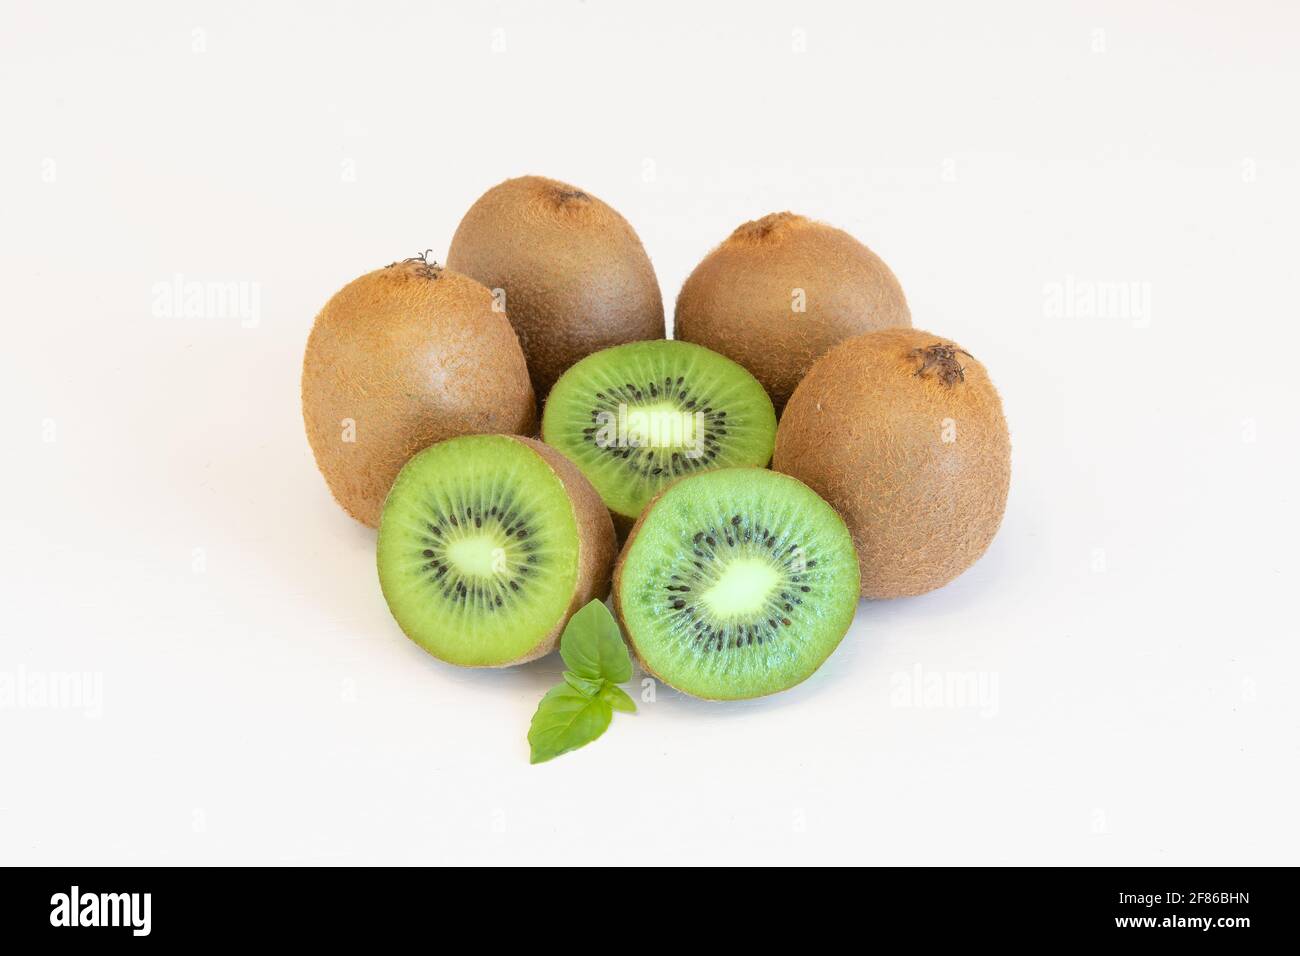 Whole and halves kiwi fruits isolated on white background with text space Stock Photo